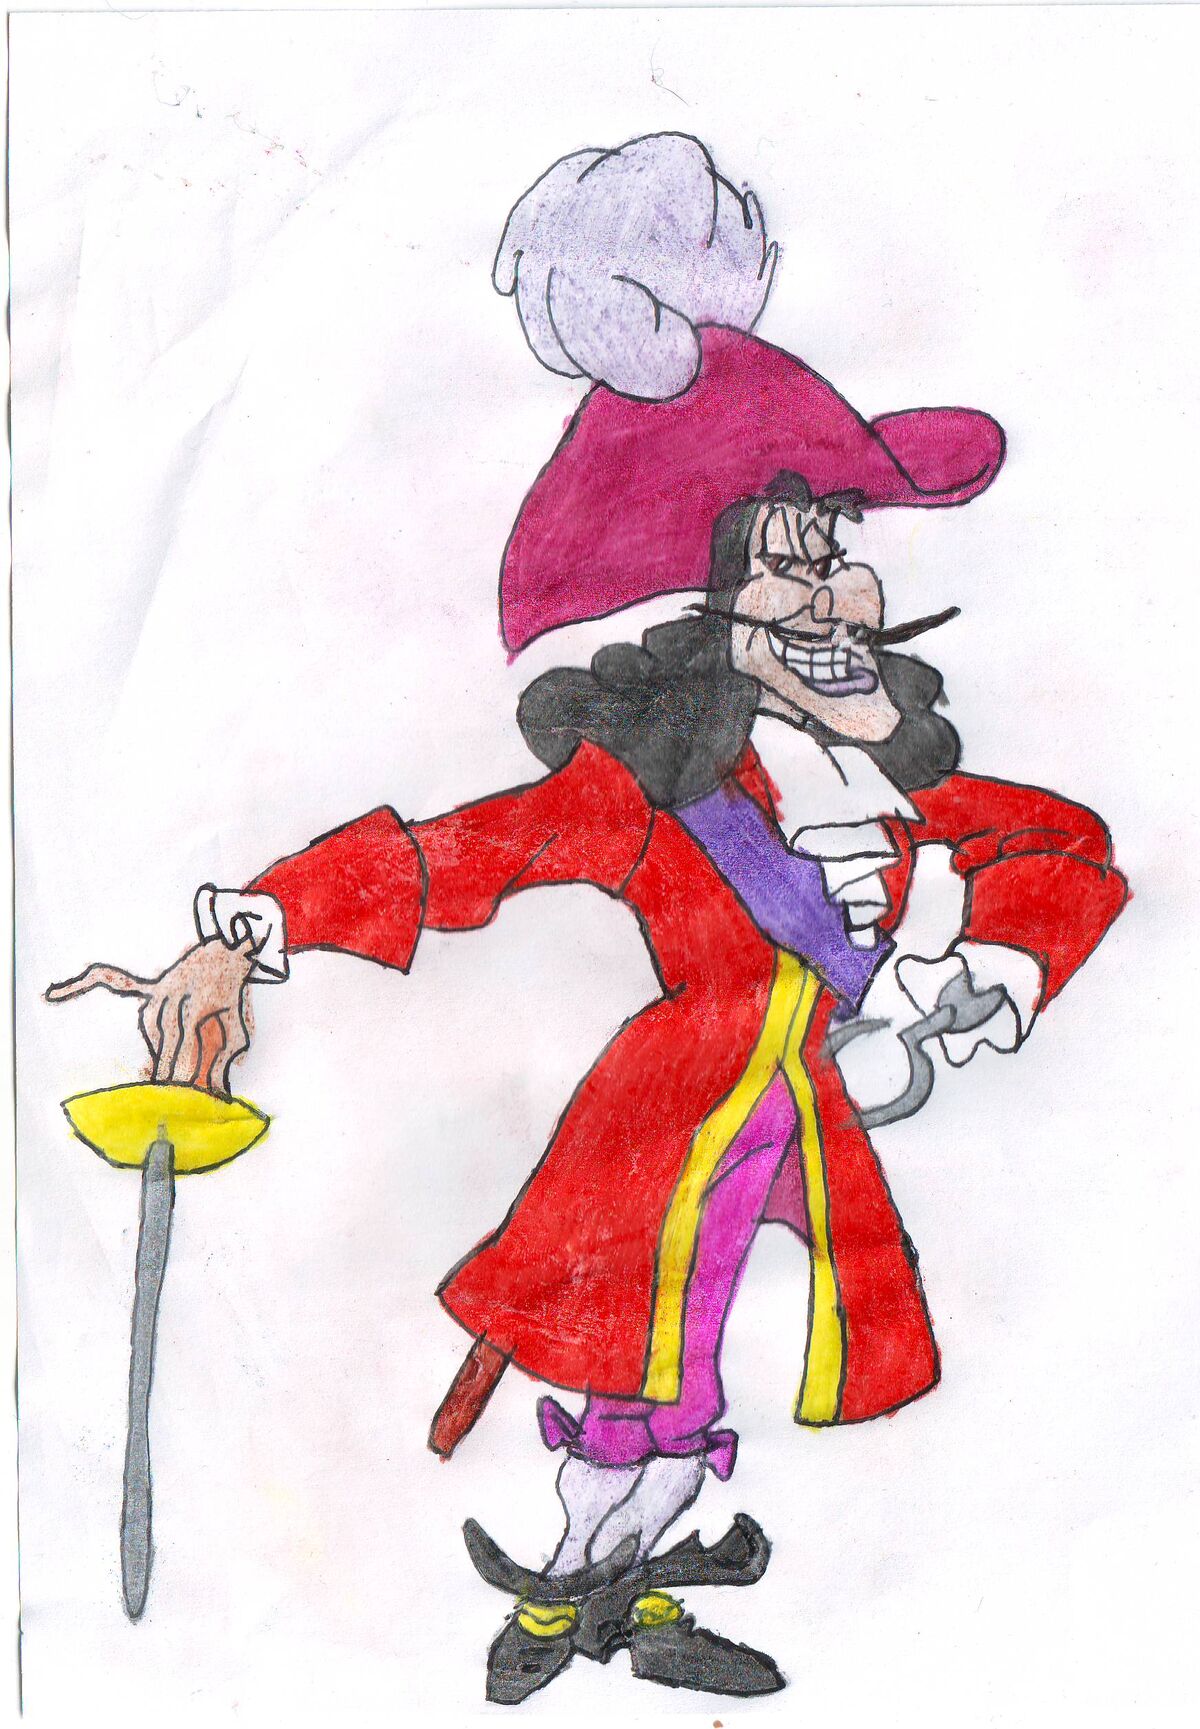 Captain Hook (without his mustache) 2 by superherofan2003 on